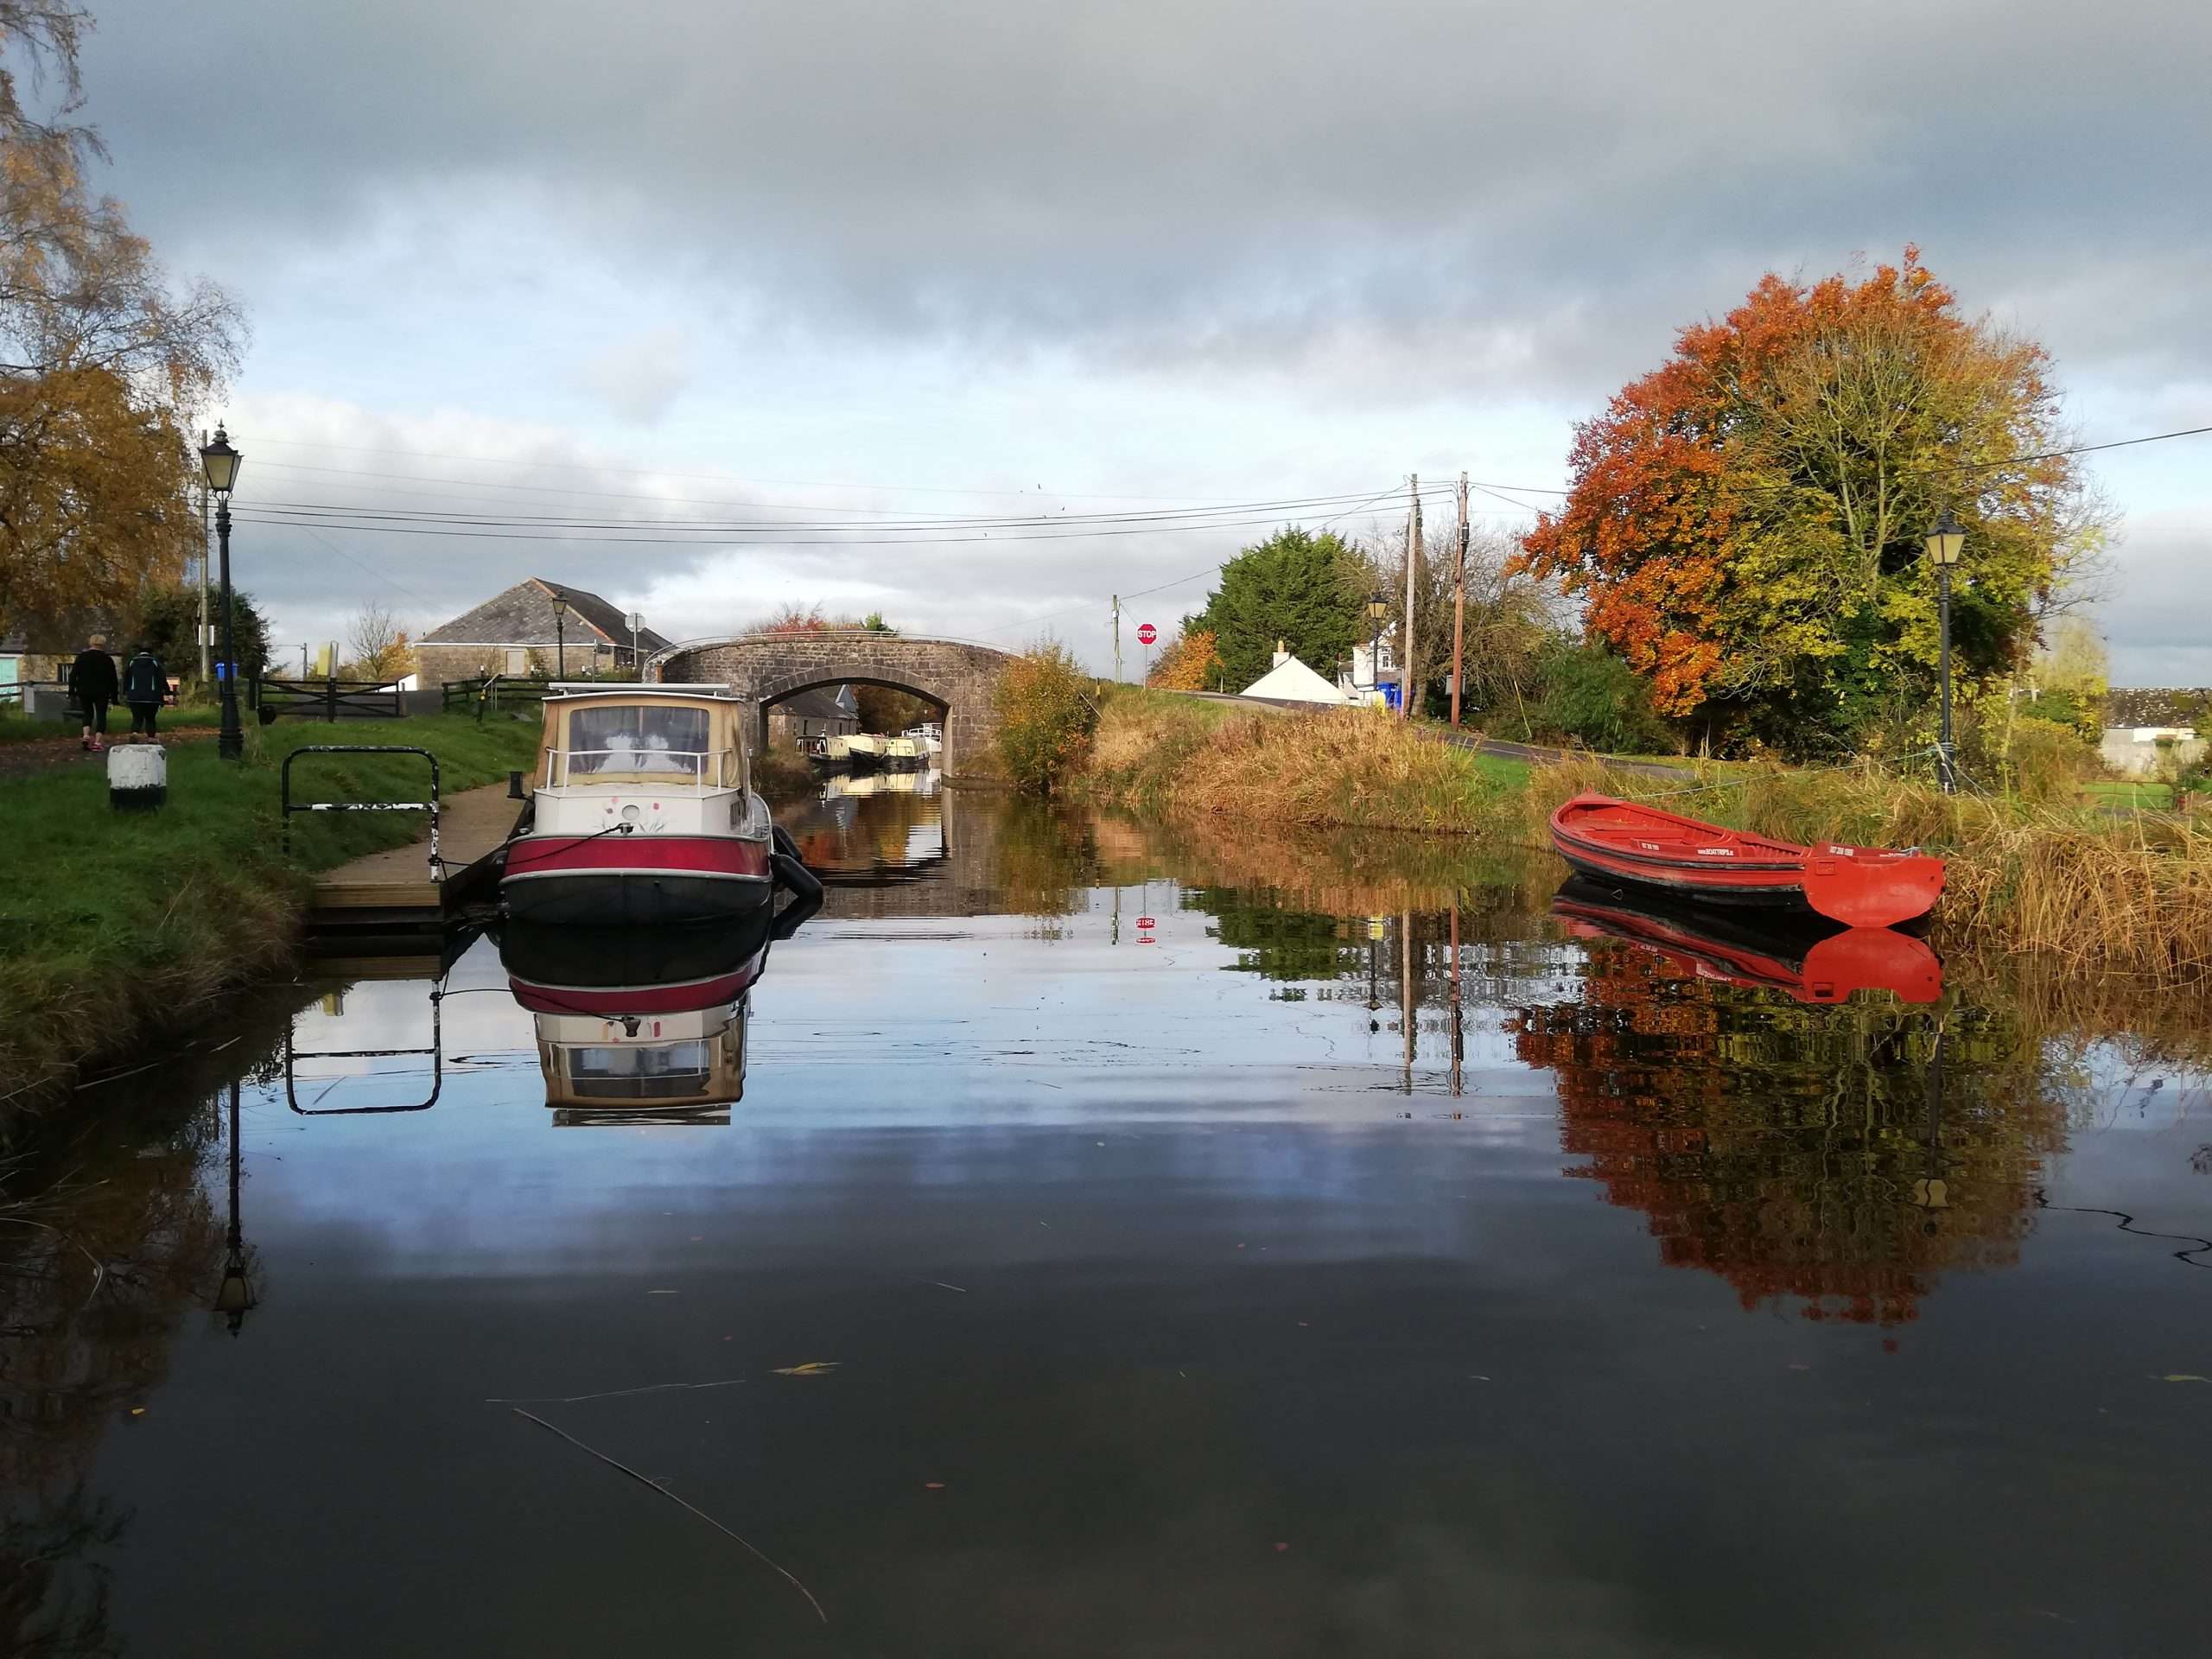 Trip Boat moored up in Vicarstown, Laois